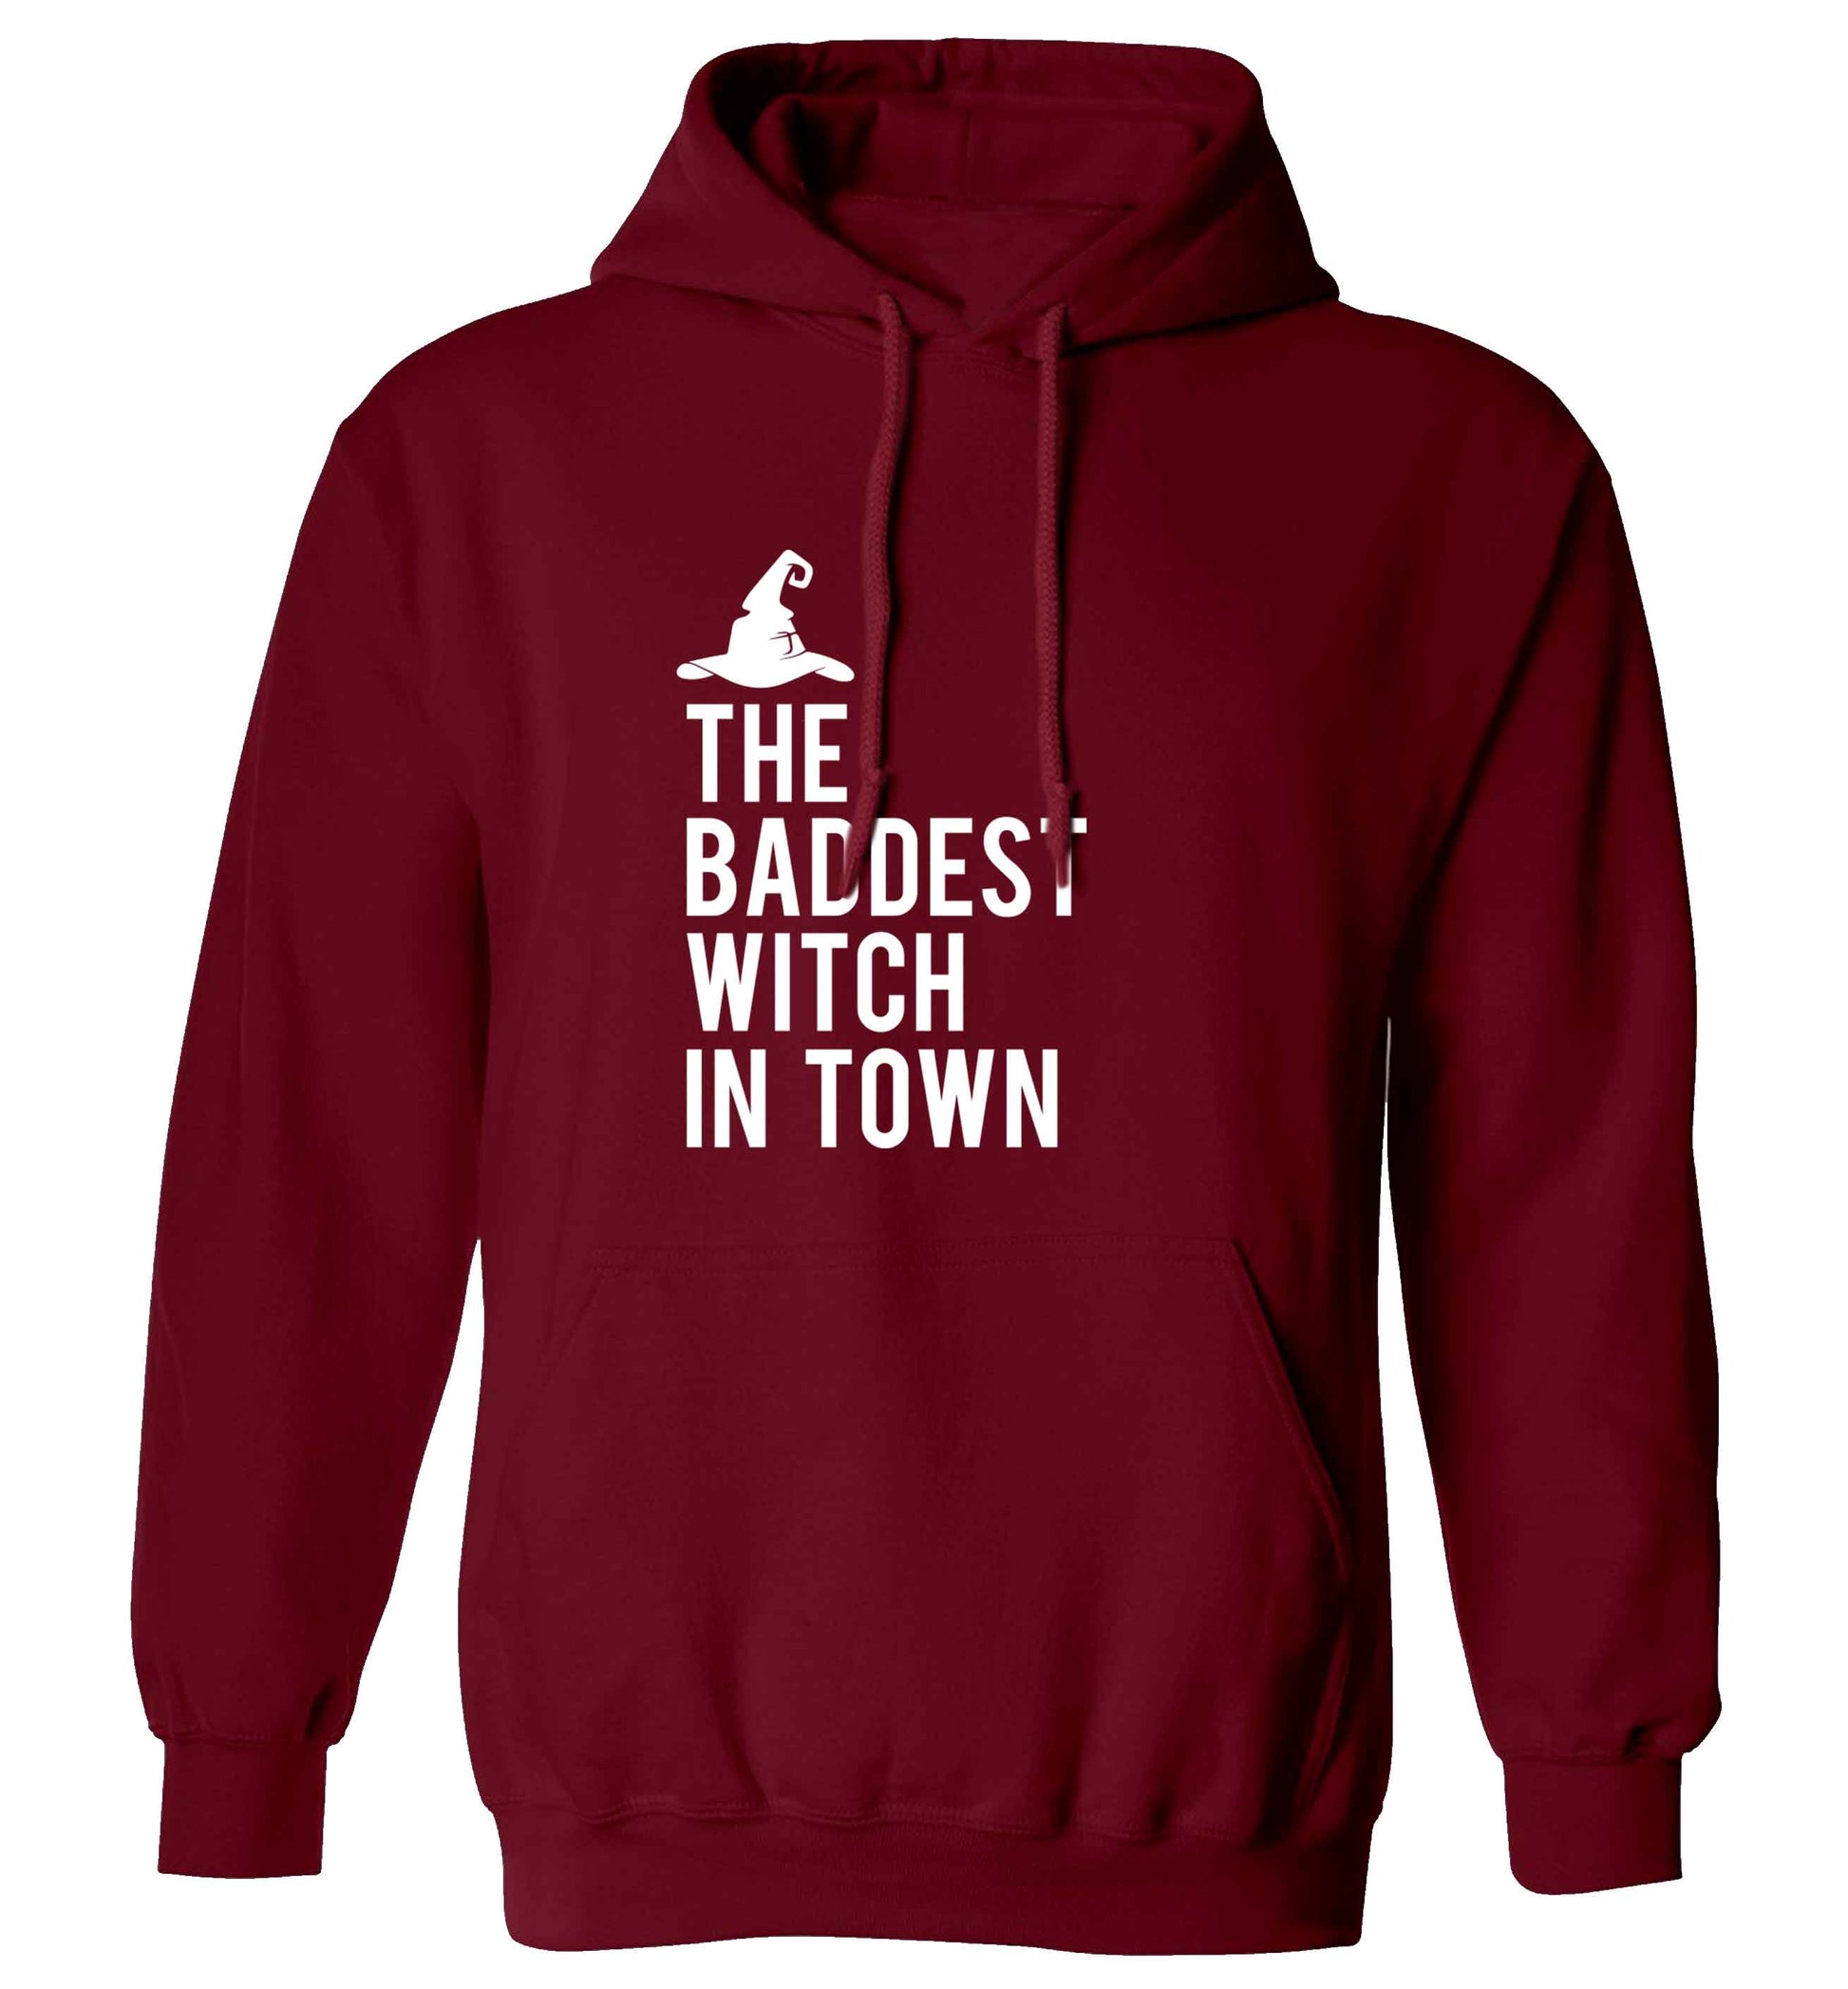 Badest witch in town adults unisex maroon hoodie 2XL